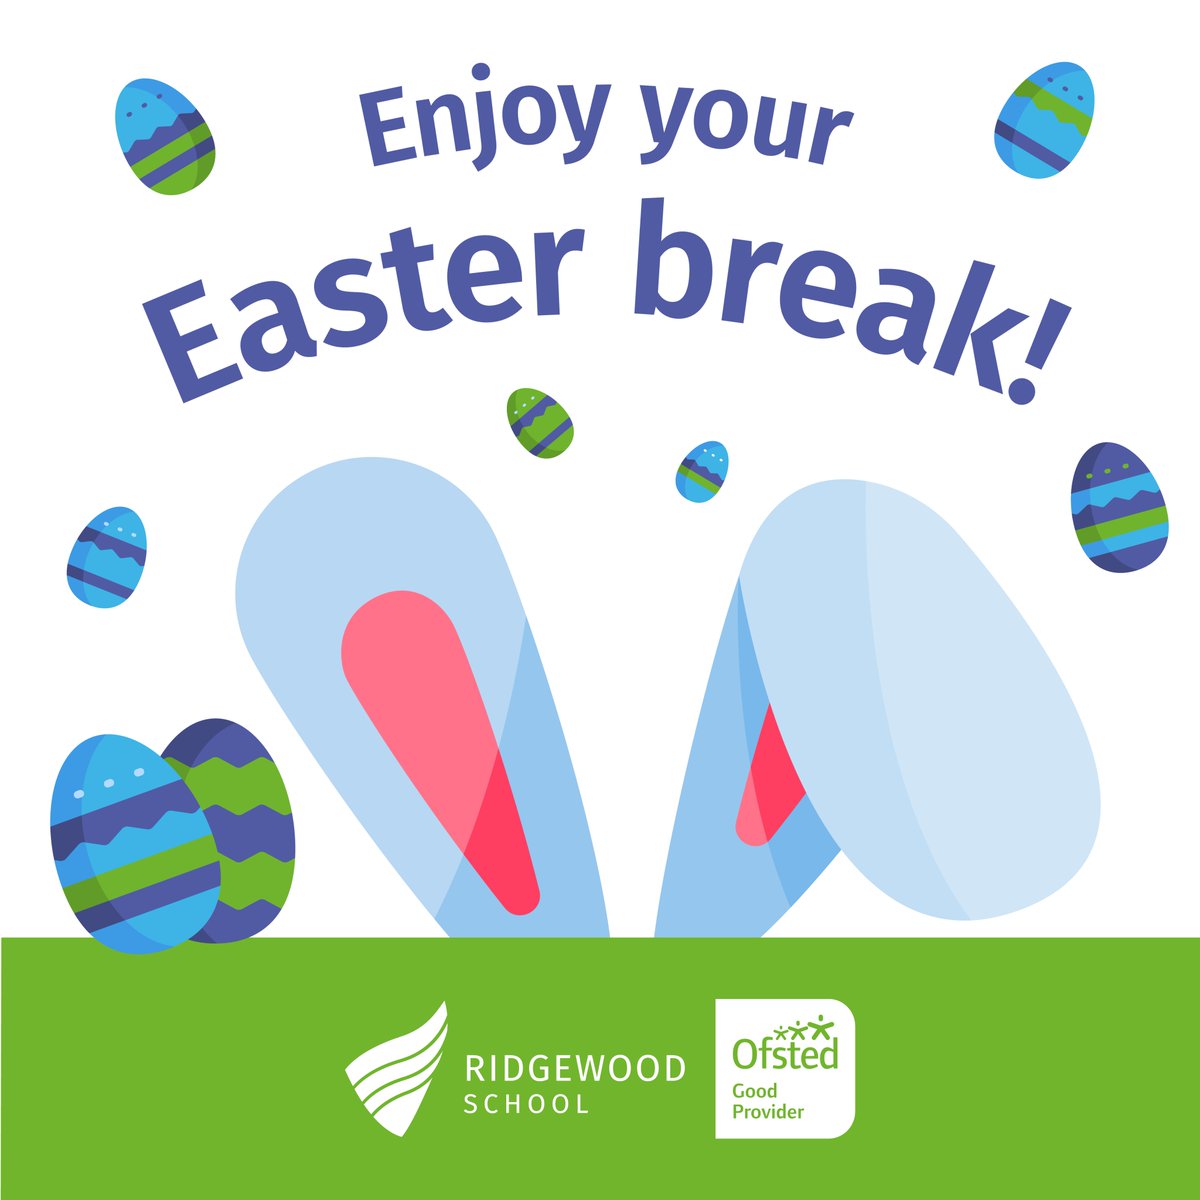 You've done a great job this term, Ridgewood. We hope all our students enjoy their Easter break - we'll see you back on Monday 15 April!